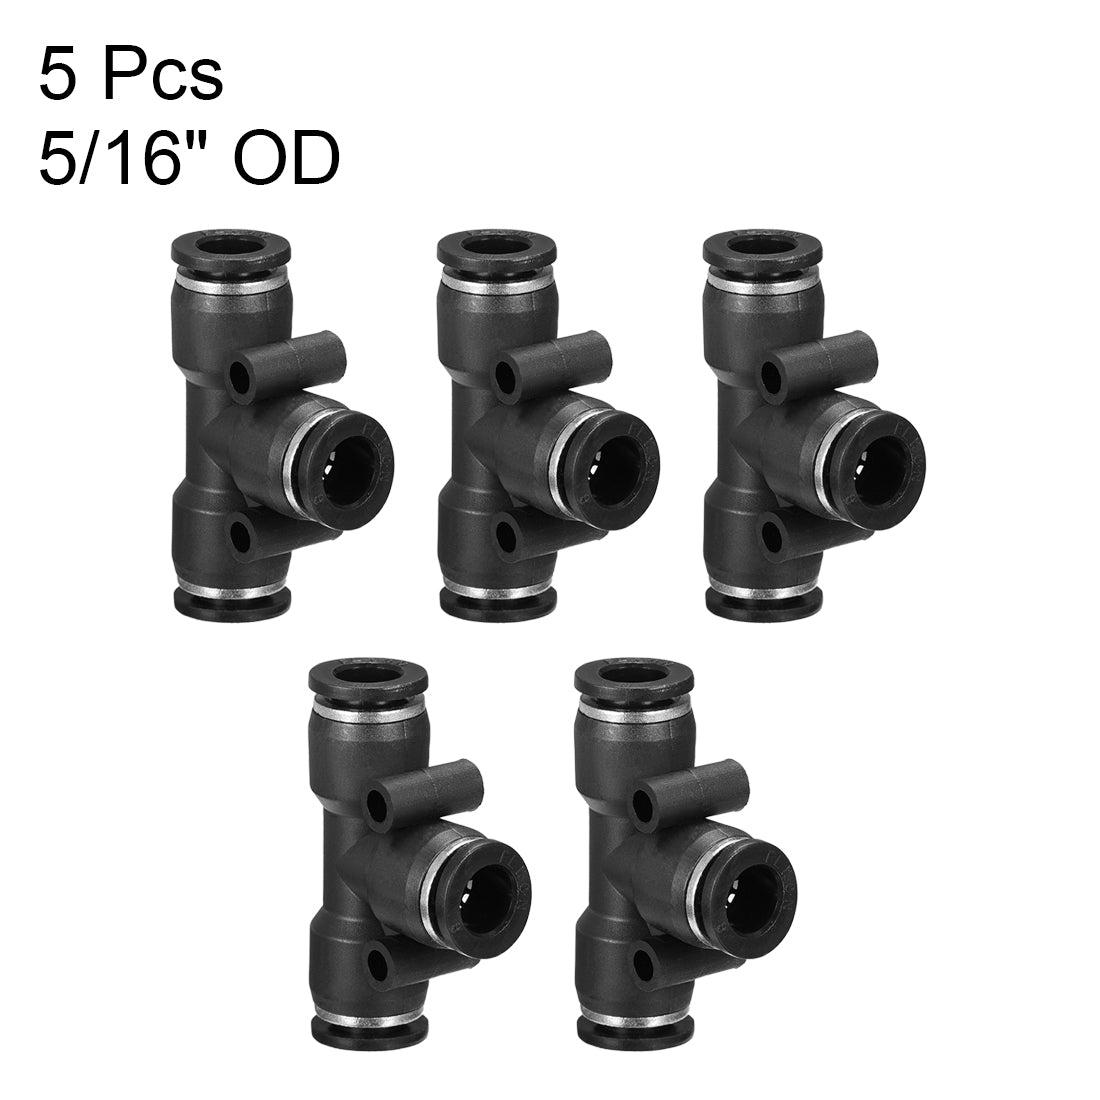 uxcell Uxcell 5 pcs Push To Connect Fittings T Type Tube Connect 8 mm or 5/16" od Push Fit Fittings Tube Fittings Push Lock (8mm T tee)